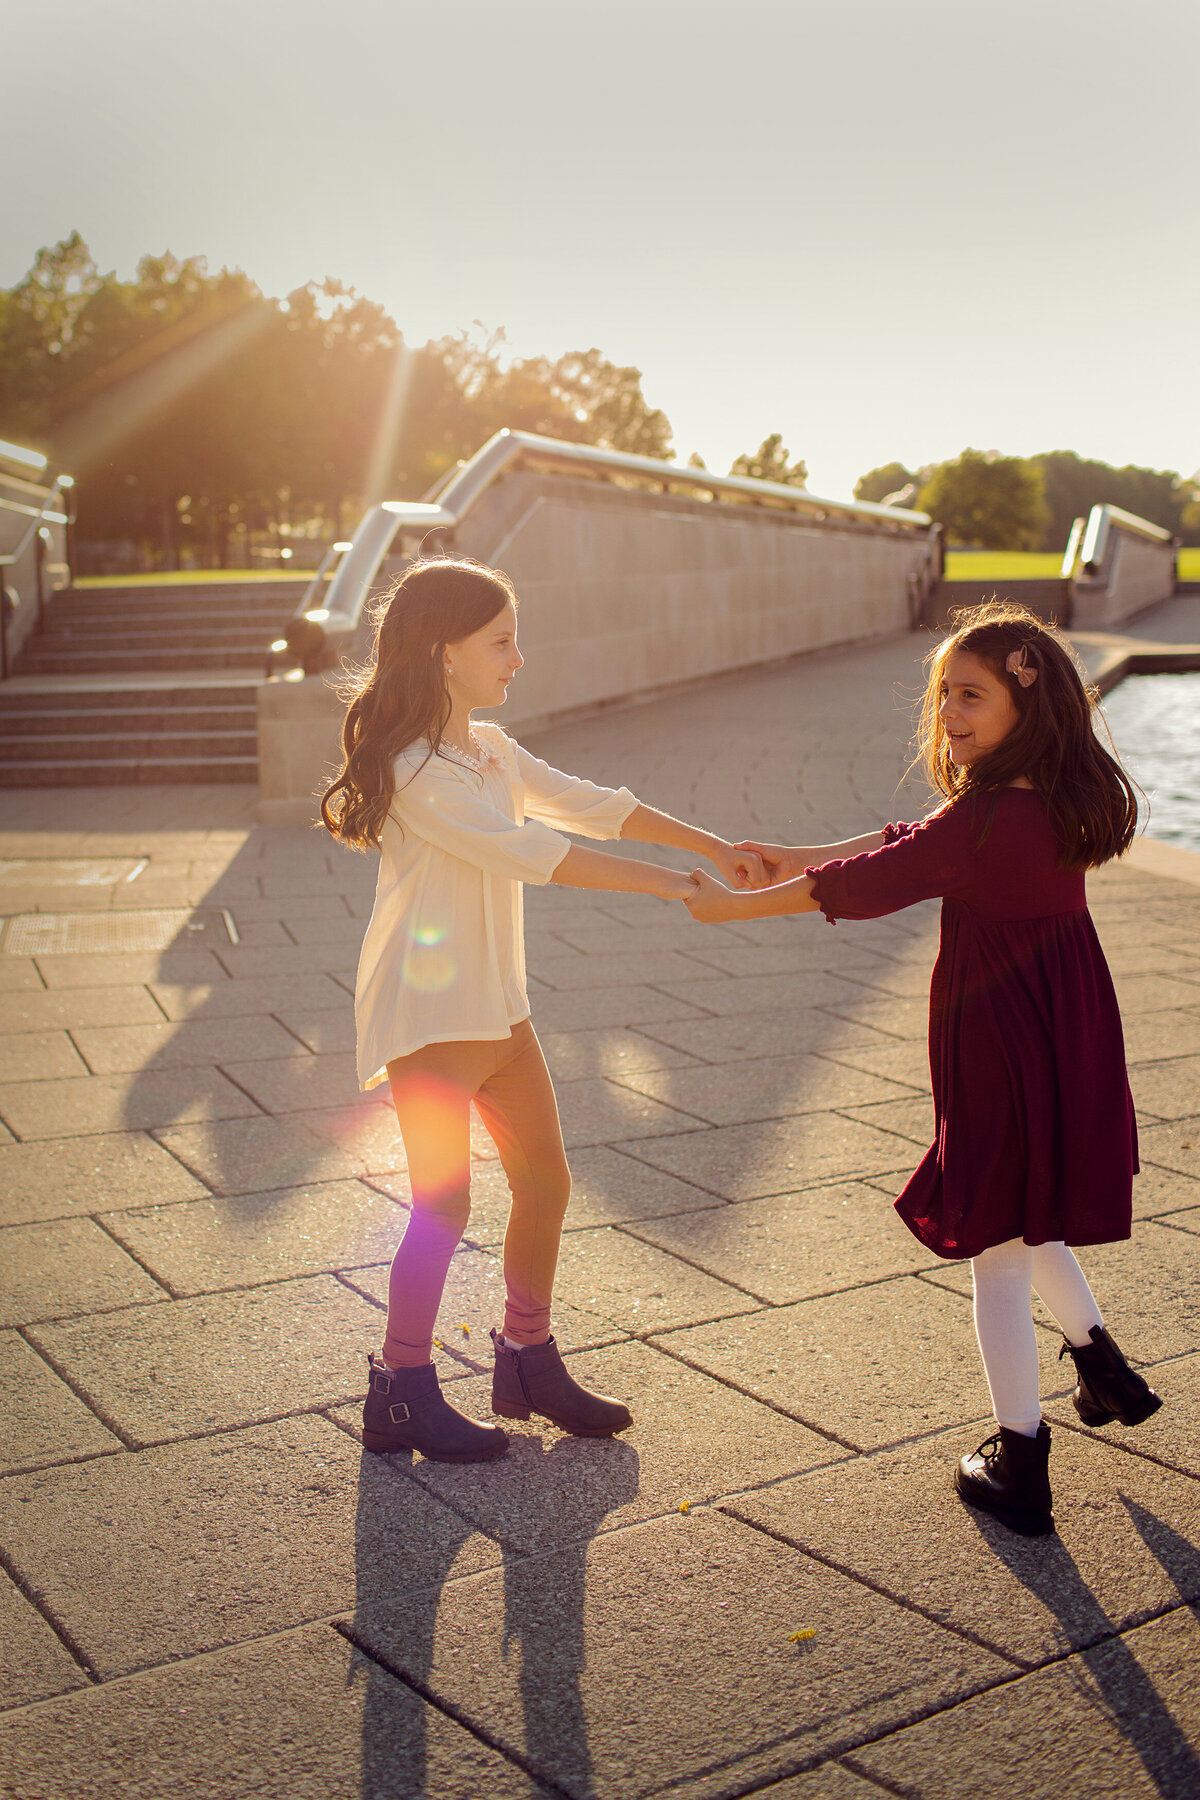 Downtown Indianapolis for this session of sibling girls, the sun coming in behind them.